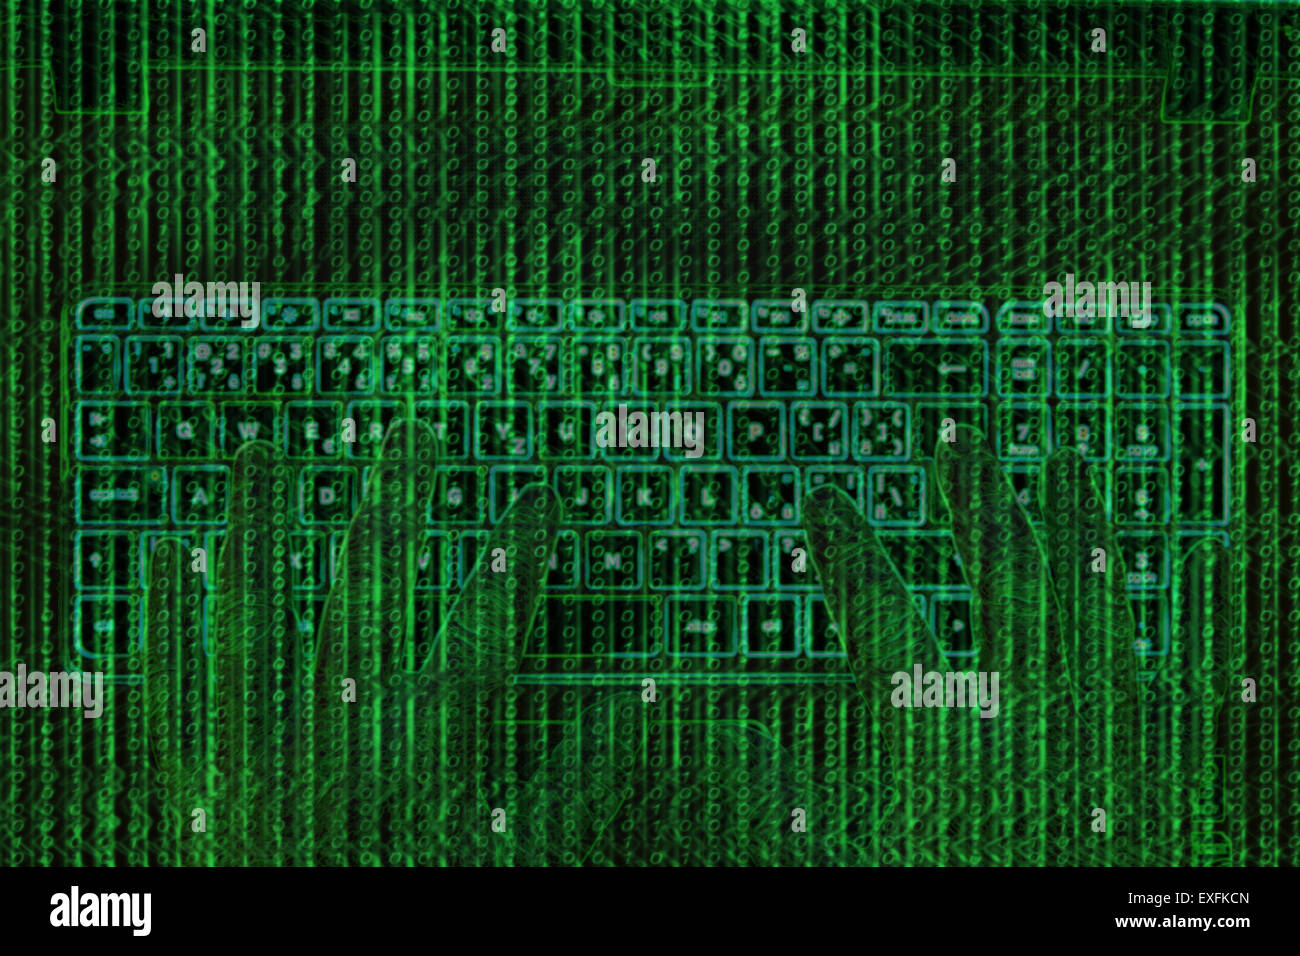 Computer abstract digital binary code illustration in green color. Stock Photo